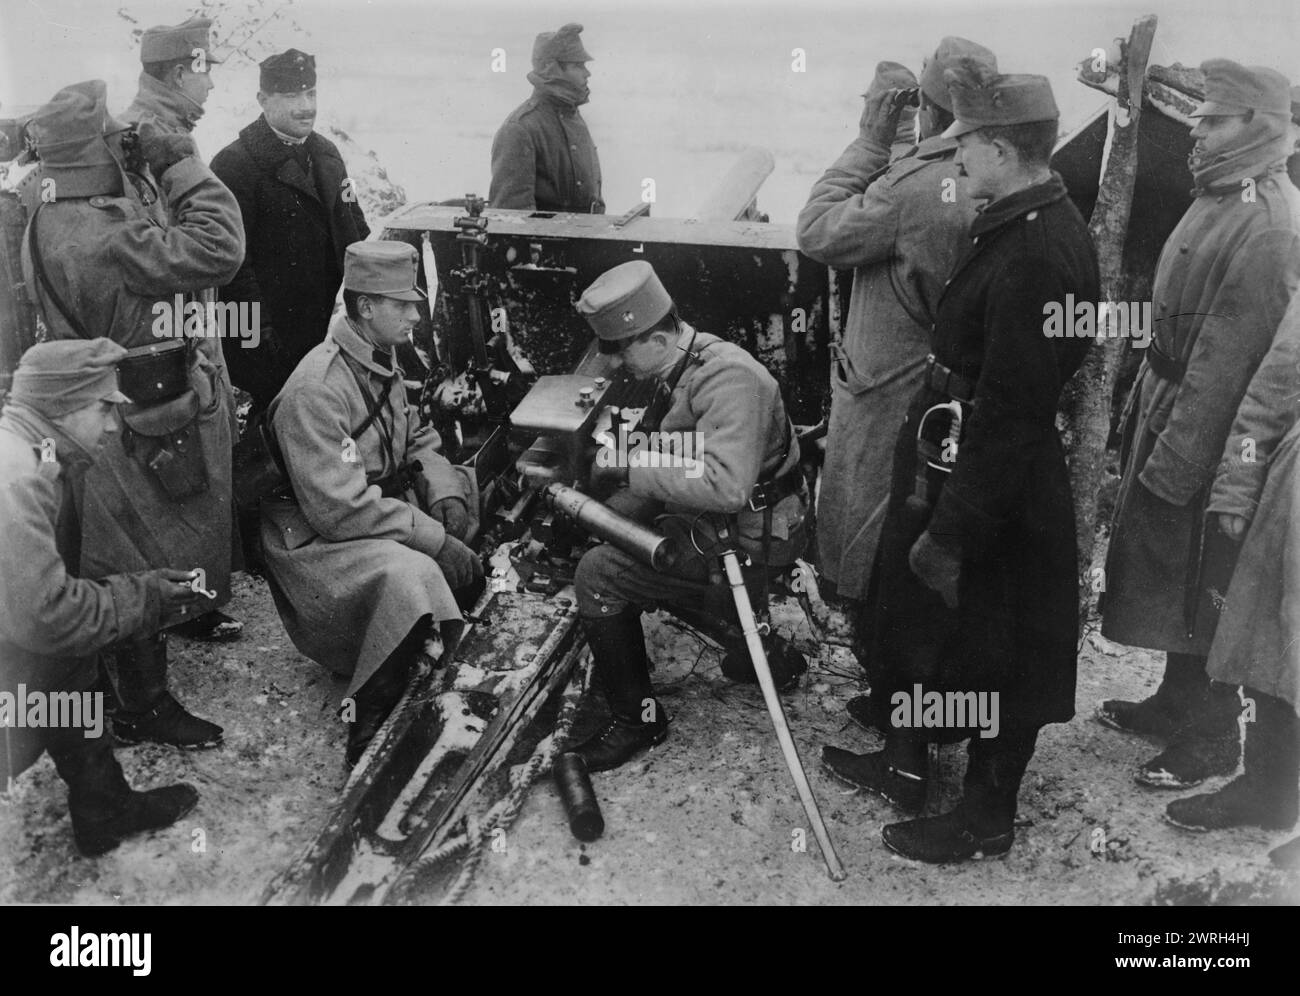 Austrian artillery in the Bukowina, between c1914 and c1915. Austrian artillery soldiers in Bukowina (Bukovina) during World War I. At the time Bukovina was part of the Austrian Empire and now is located in Romania and Ukraine. Stock Photo